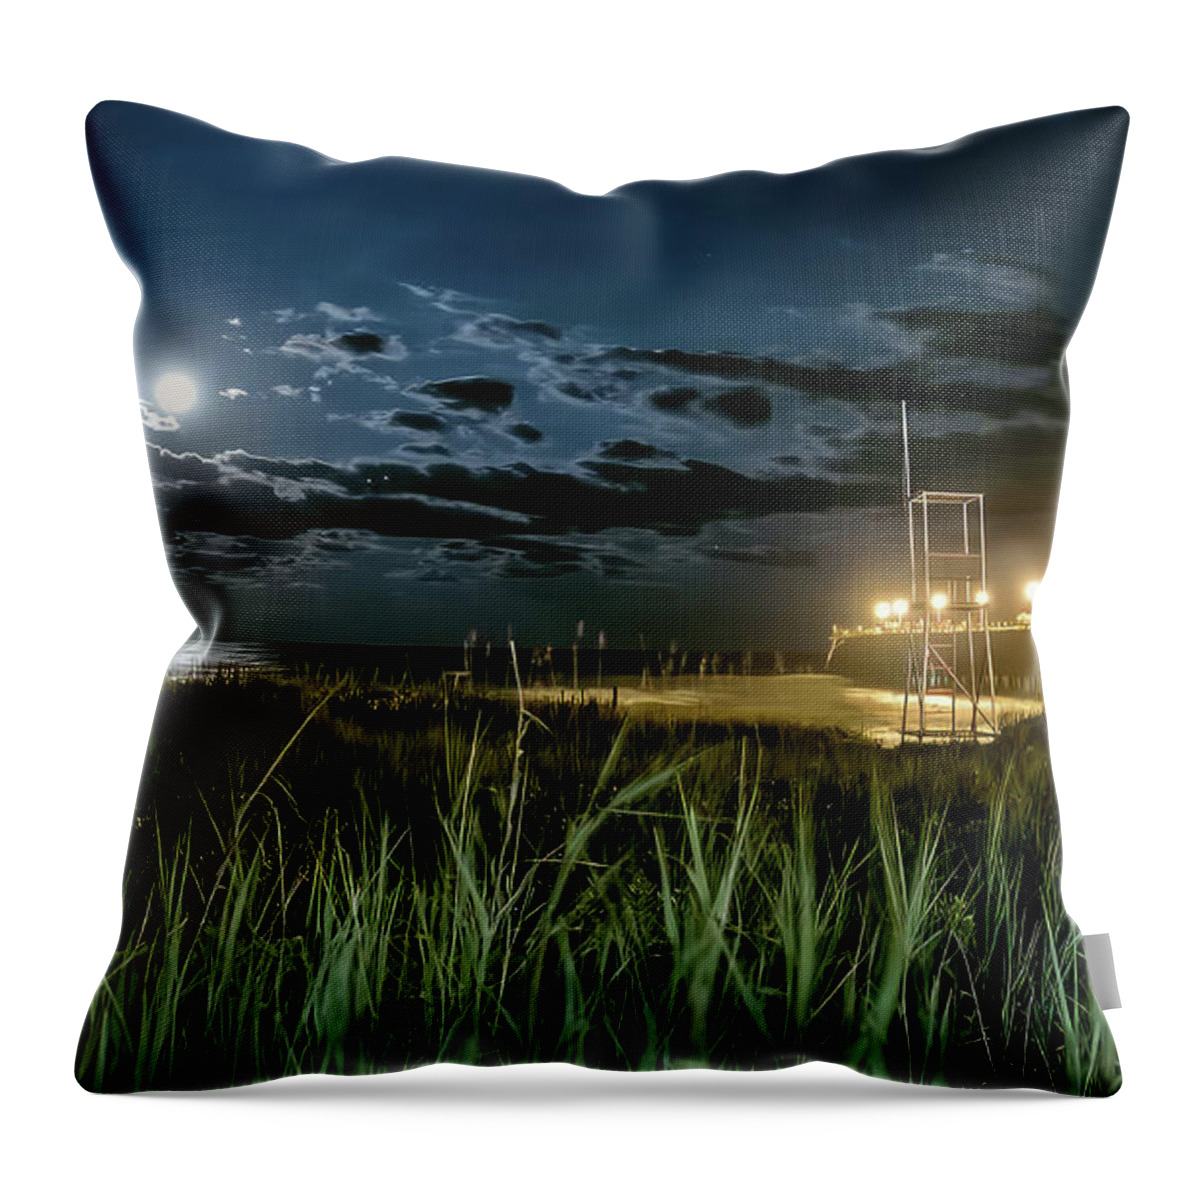 Full Moon Throw Pillow featuring the photograph Pier And Full Moon by Phil Mancuso